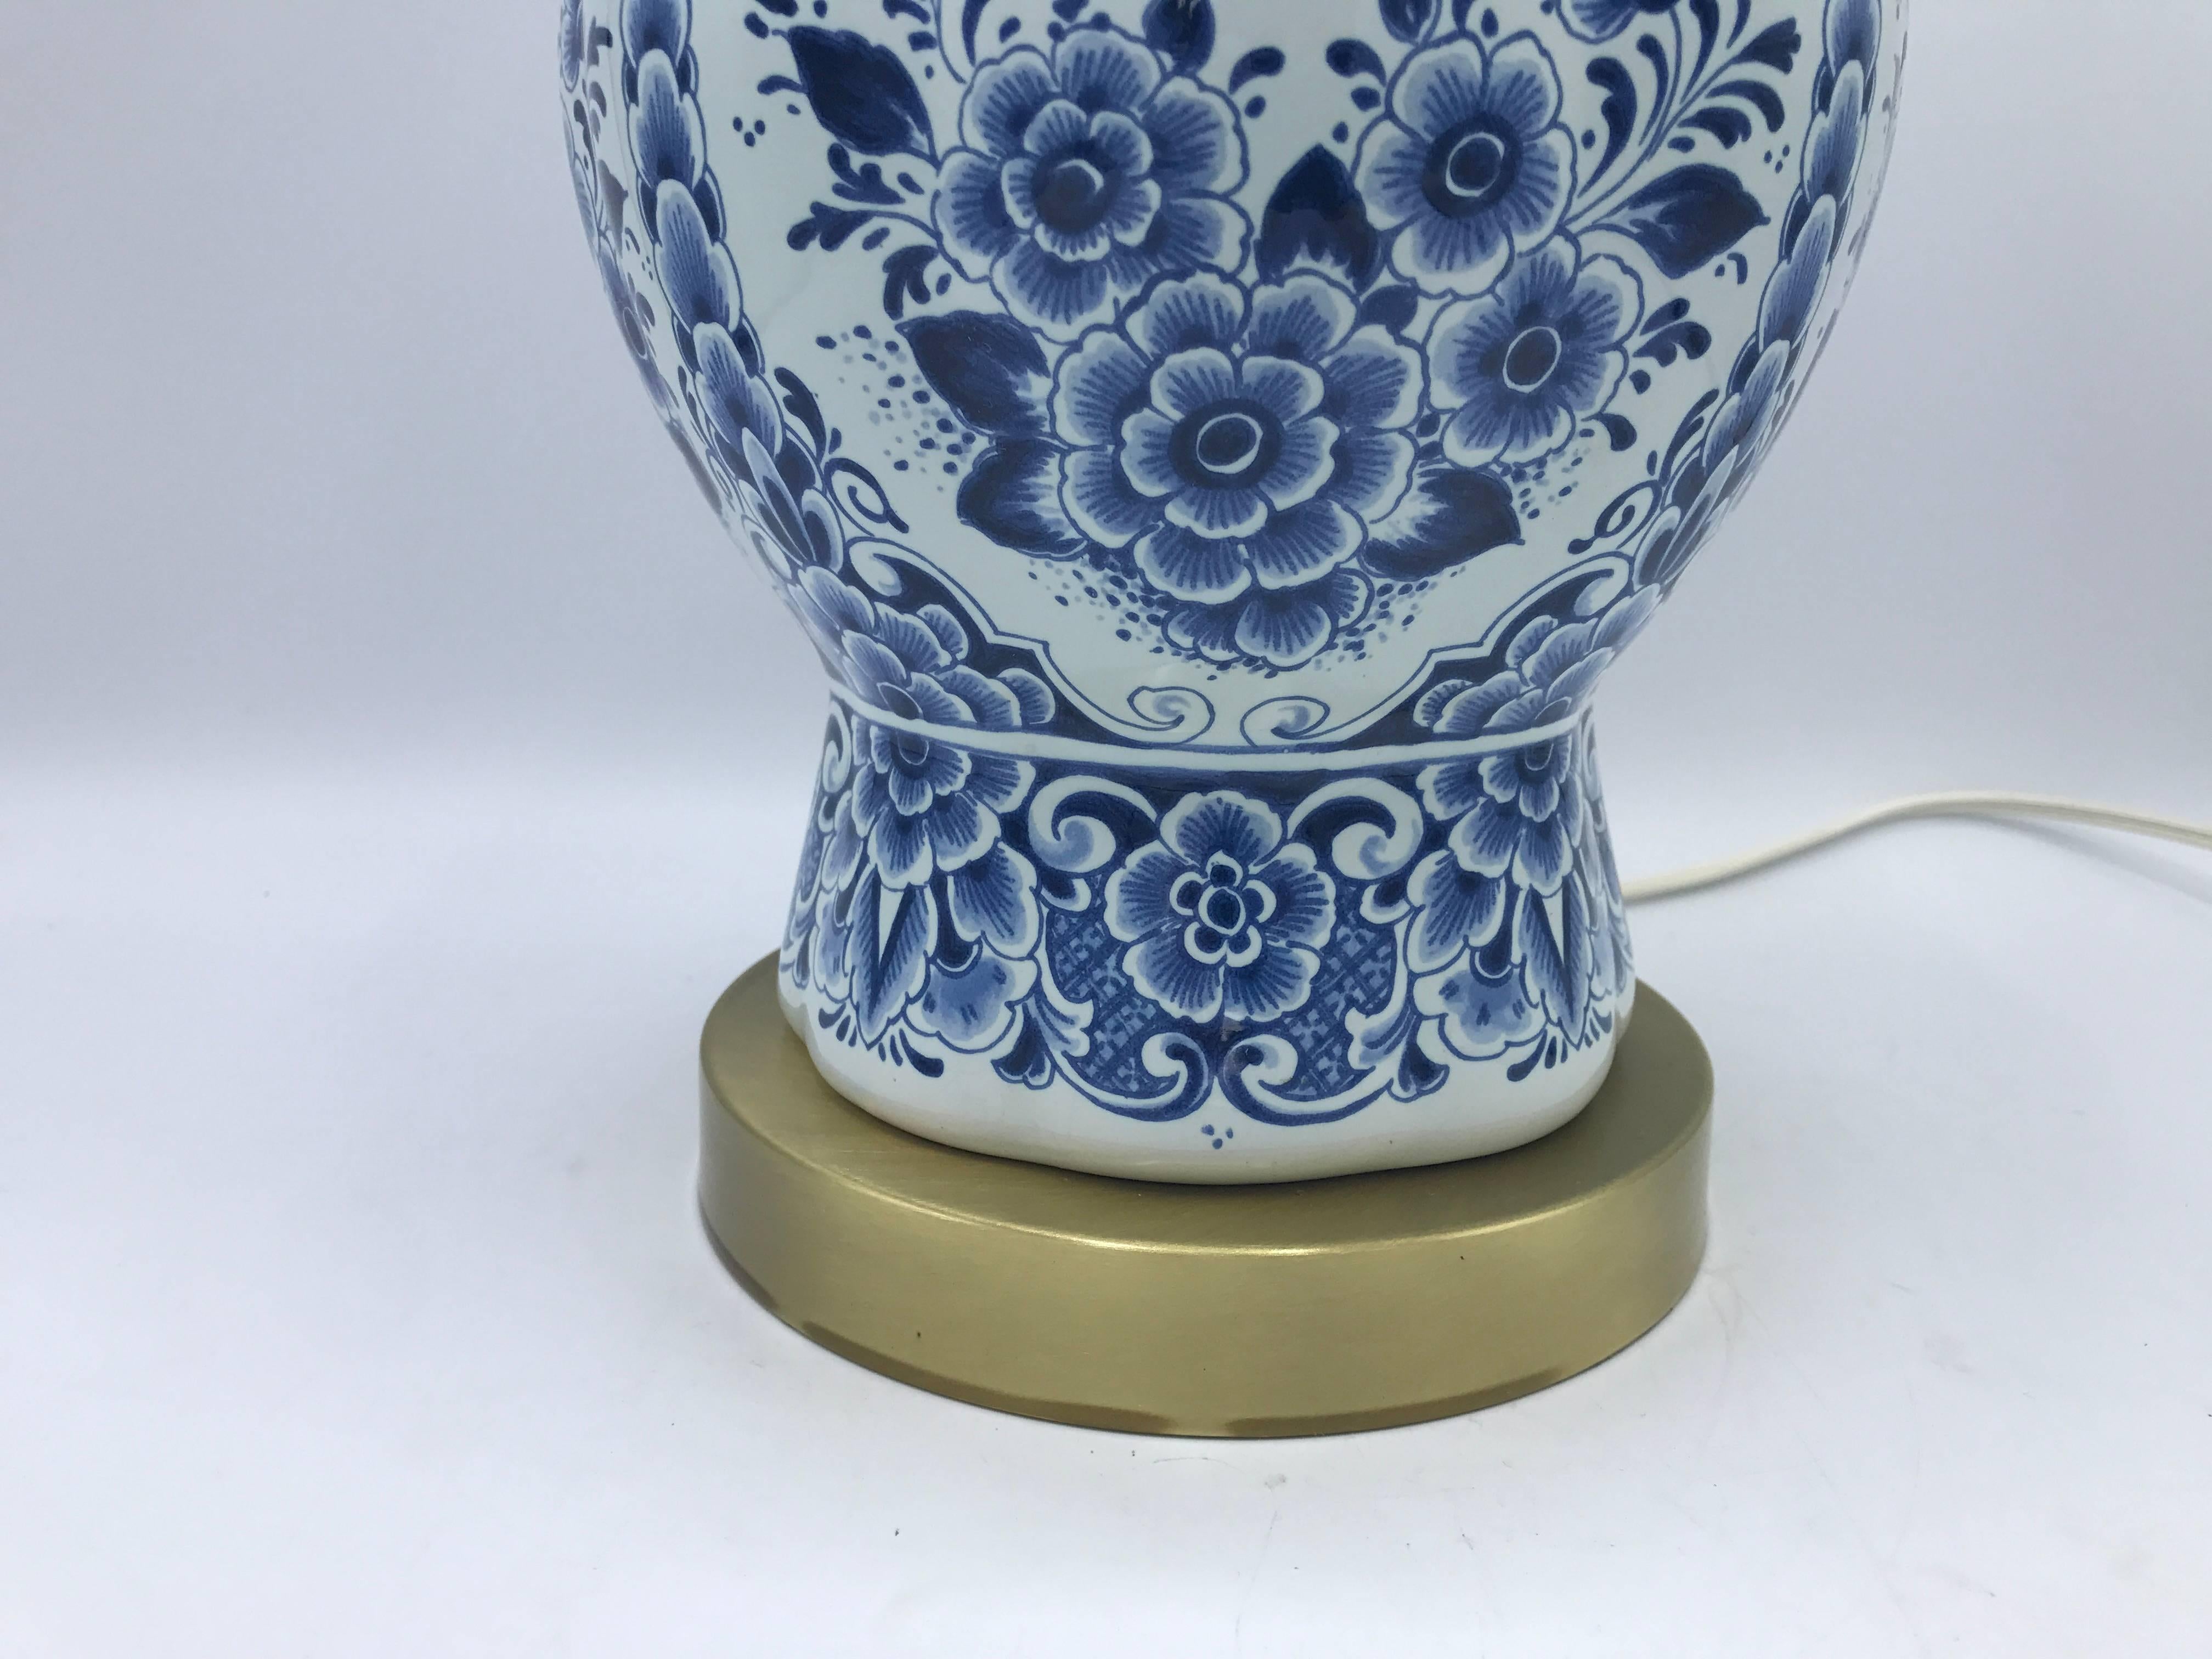 19th Century Delft Vase Lamp with a Blue and White Floral Motif on Brass Base 3